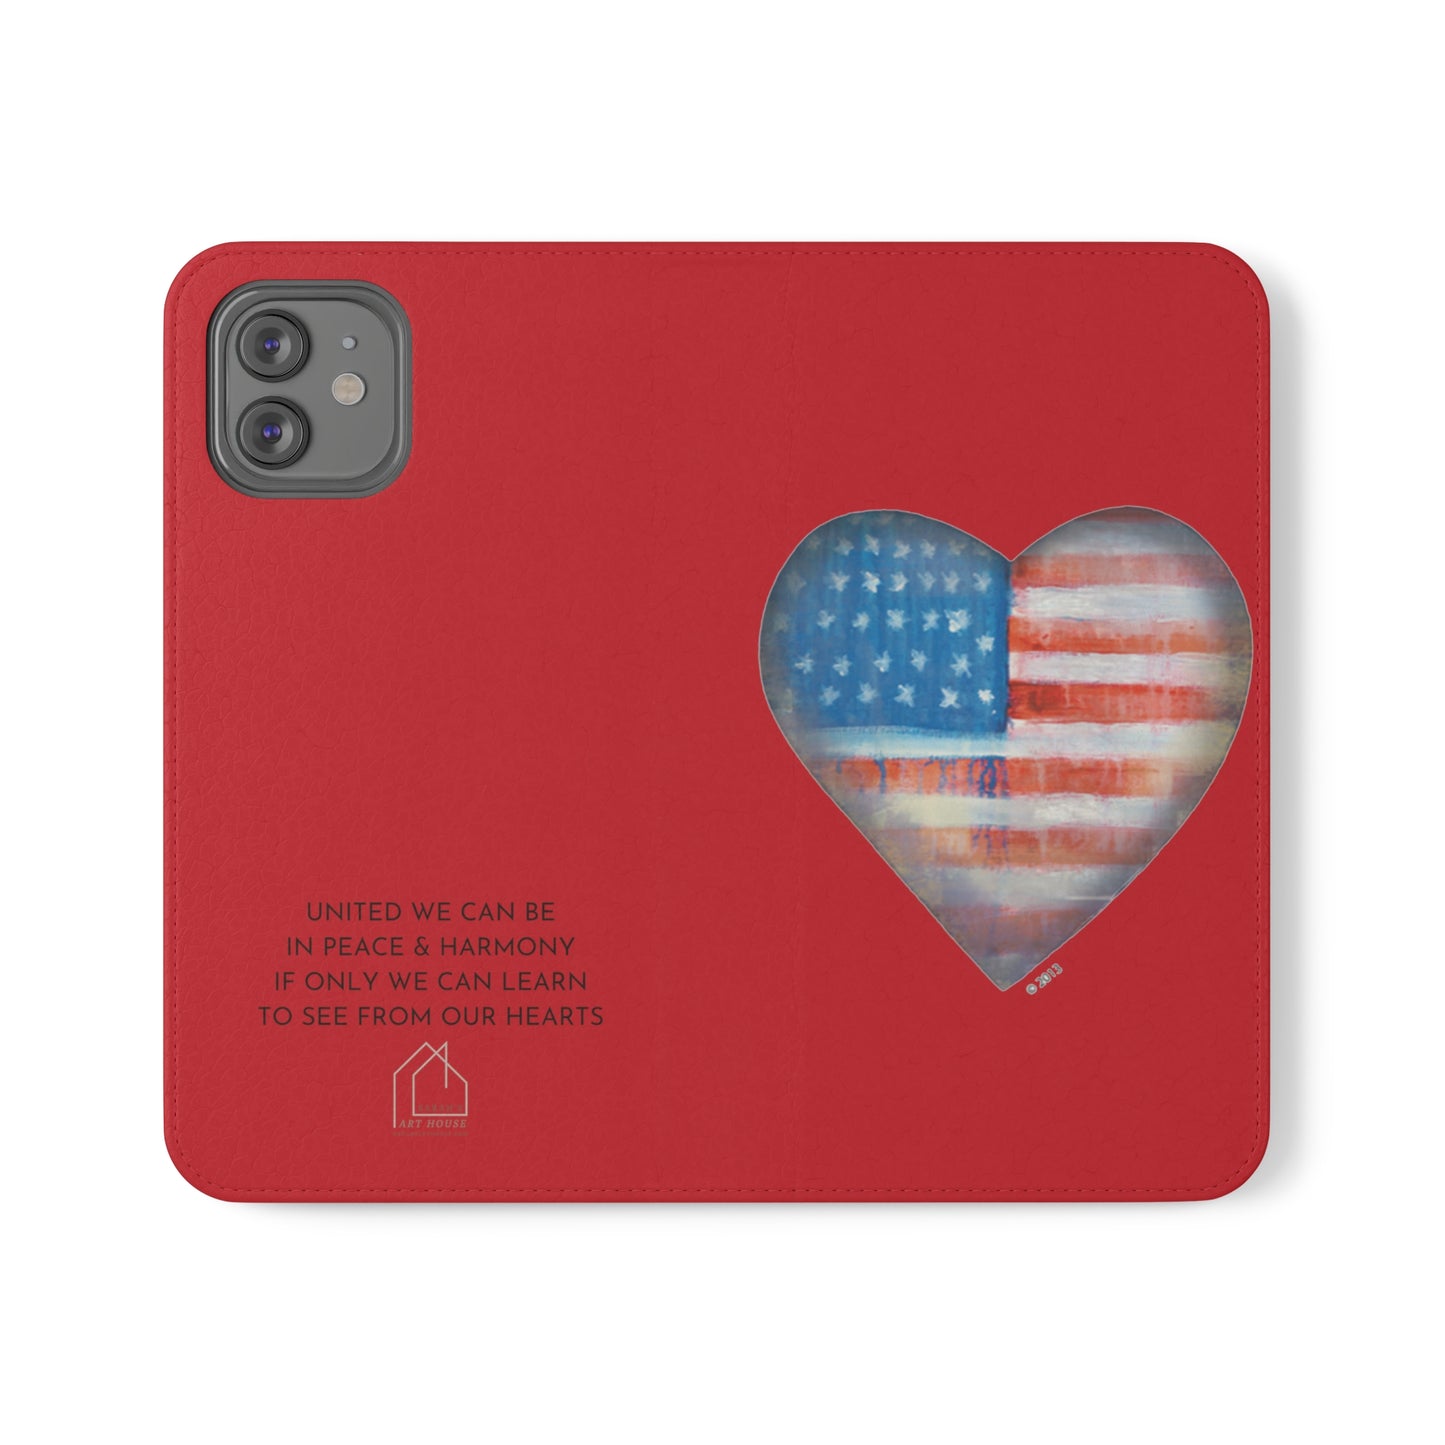 Phone Flip Cases - Wallet phone case - American Heart phone case with poem